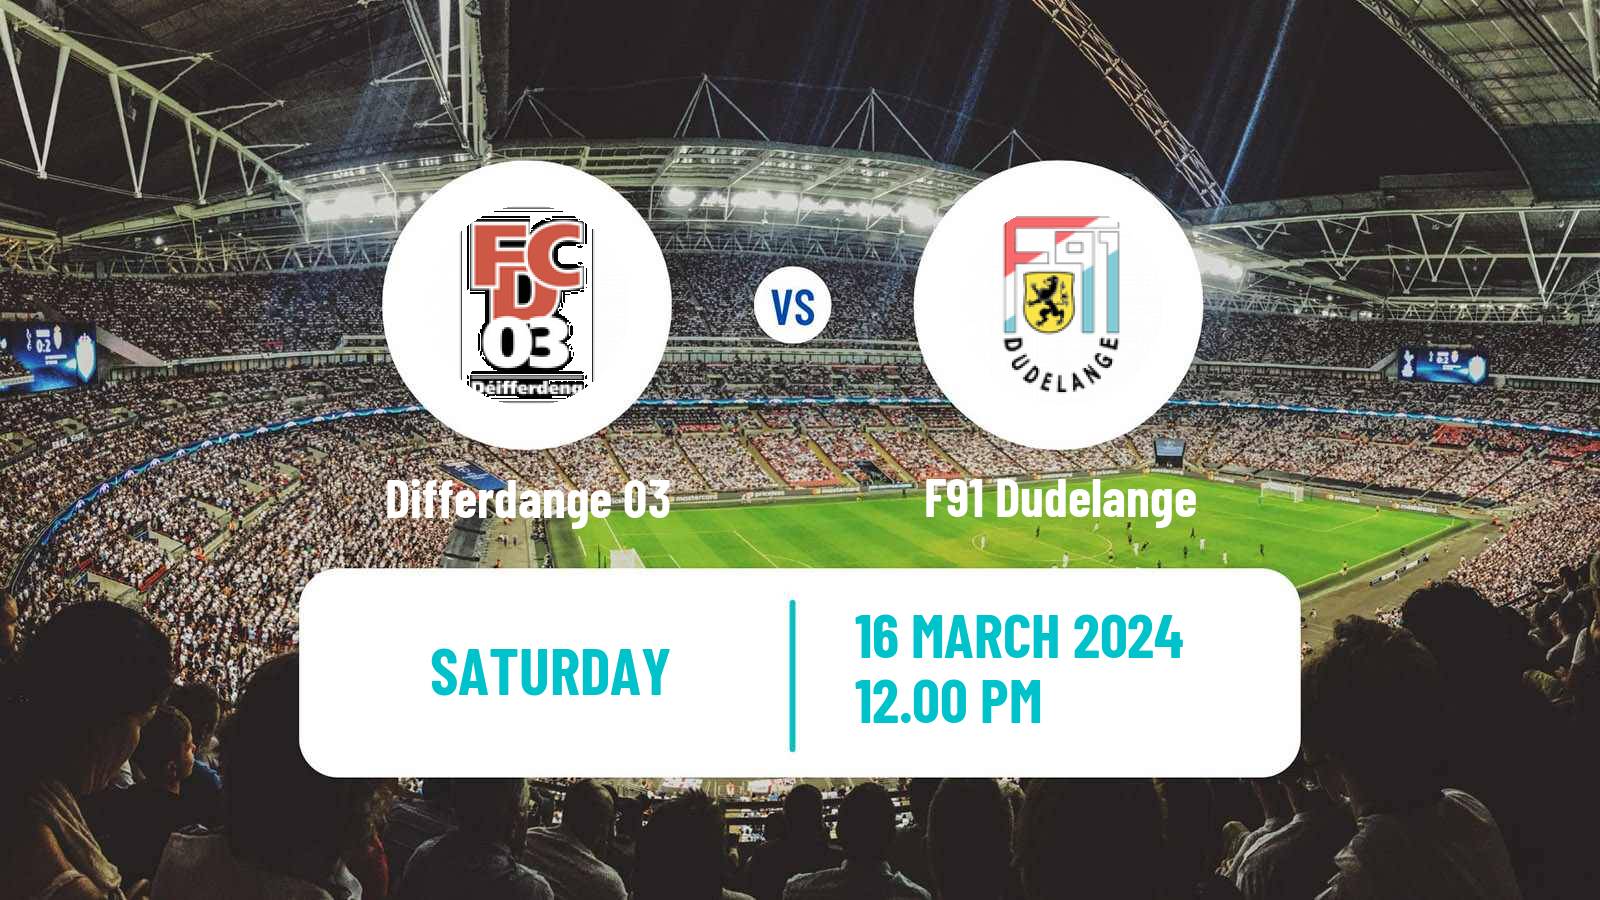 Soccer Luxembourg National Division Differdange 03 - F91 Dudelange